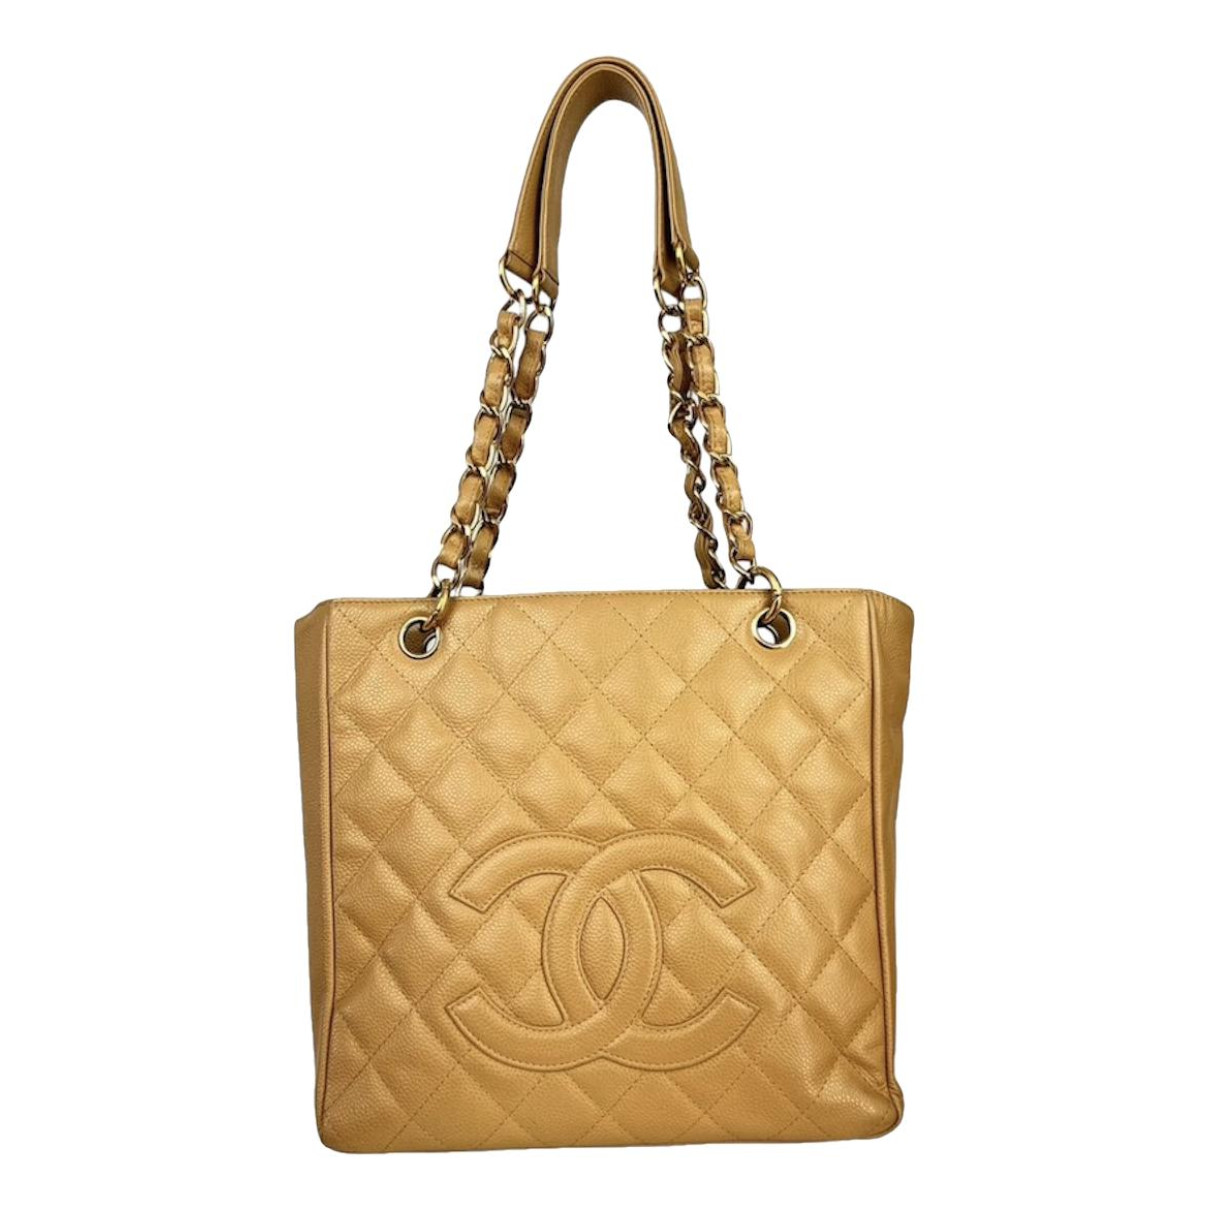 bags Chanel handbags Petite Shopping Tote for Female Leather. Used condition